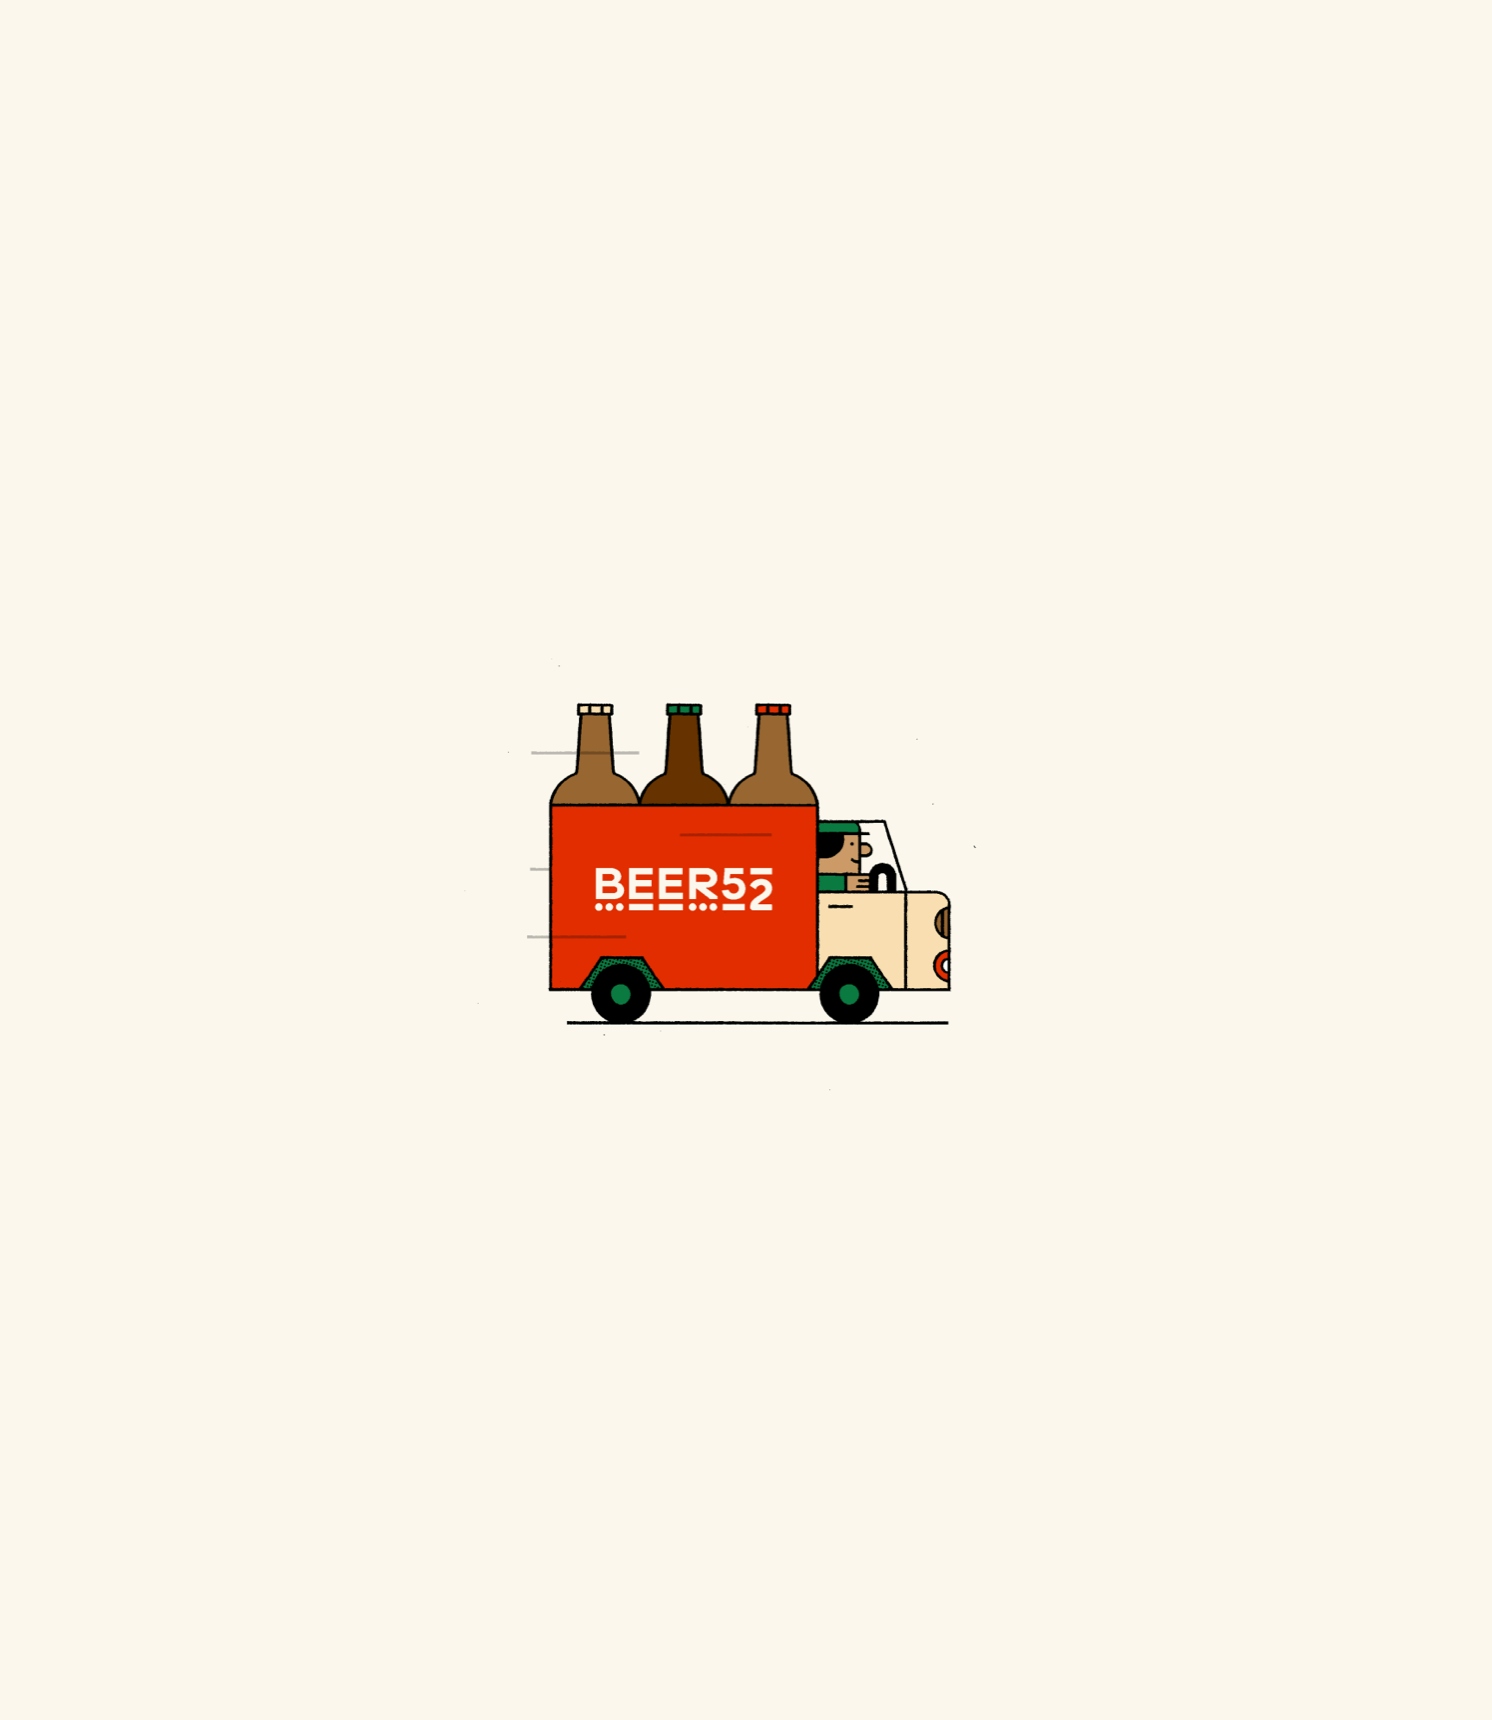 An illustration of a Beer52 truck sits on an off-white background.